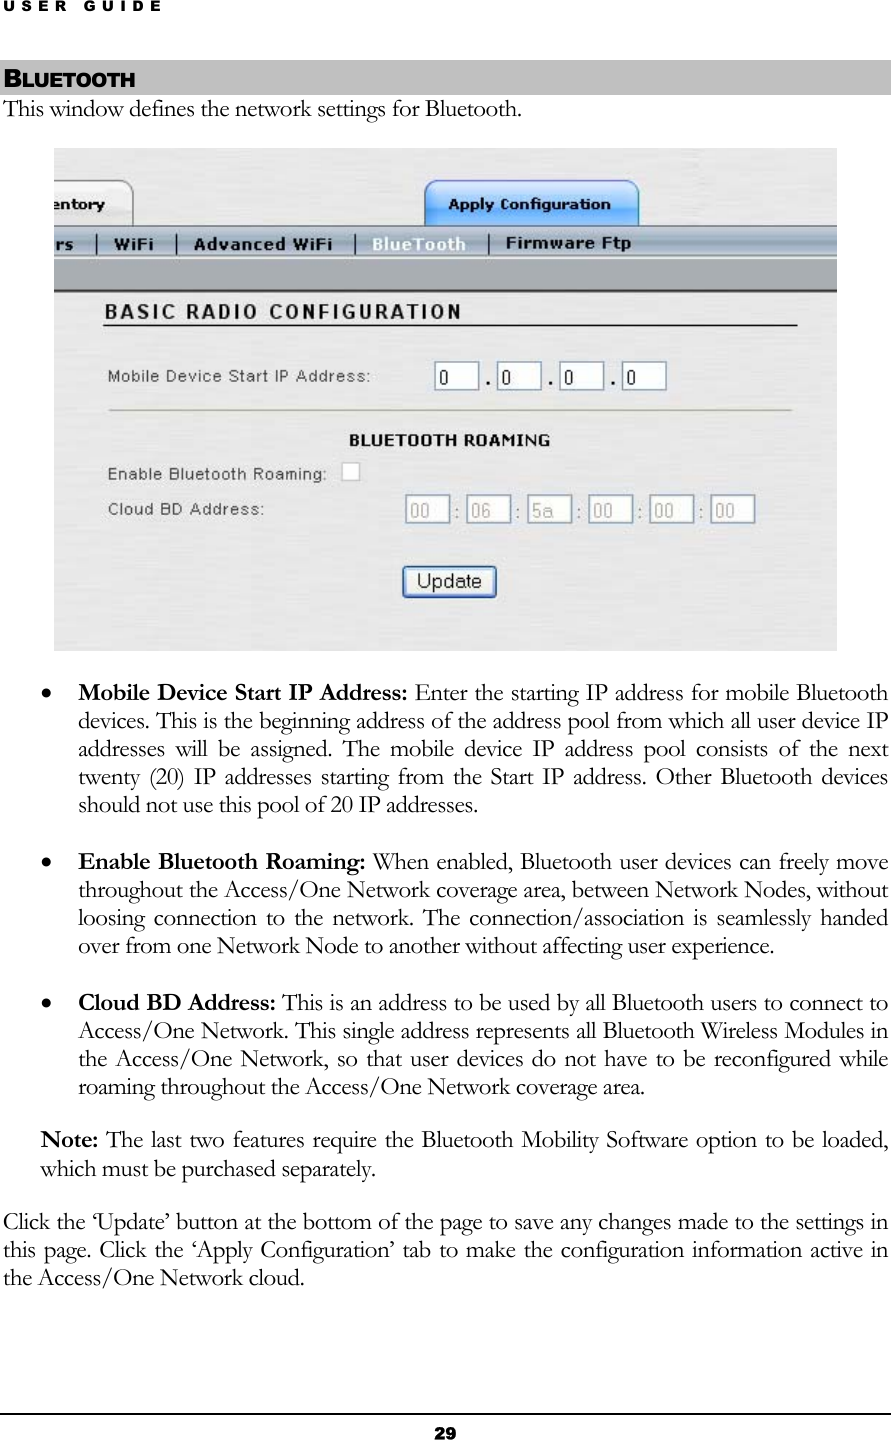 USER GUIDE BLUETOOTH This window defines the network settings for Bluetooth.  • Mobile Device Start IP Address: Enter the starting IP address for mobile Bluetooth devices. This is the beginning address of the address pool from which all user device IP addresses will be assigned. The mobile device IP address pool consists of the next twenty (20) IP addresses starting from the Start IP address. Other Bluetooth devices should not use this pool of 20 IP addresses. • Enable Bluetooth Roaming: When enabled, Bluetooth user devices can freely move throughout the Access/One Network coverage area, between Network Nodes, without loosing connection to the network. The connection/association is seamlessly handed over from one Network Node to another without affecting user experience. • Cloud BD Address: This is an address to be used by all Bluetooth users to connect to Access/One Network. This single address represents all Bluetooth Wireless Modules in the Access/One Network, so that user devices do not have to be reconfigured while roaming throughout the Access/One Network coverage area. Note: The last two features require the Bluetooth Mobility Software option to be loaded, which must be purchased separately. Click the ‘Update’ button at the bottom of the page to save any changes made to the settings in this page. Click the ‘Apply Configuration’ tab to make the configuration information active in the Access/One Network cloud.  29 